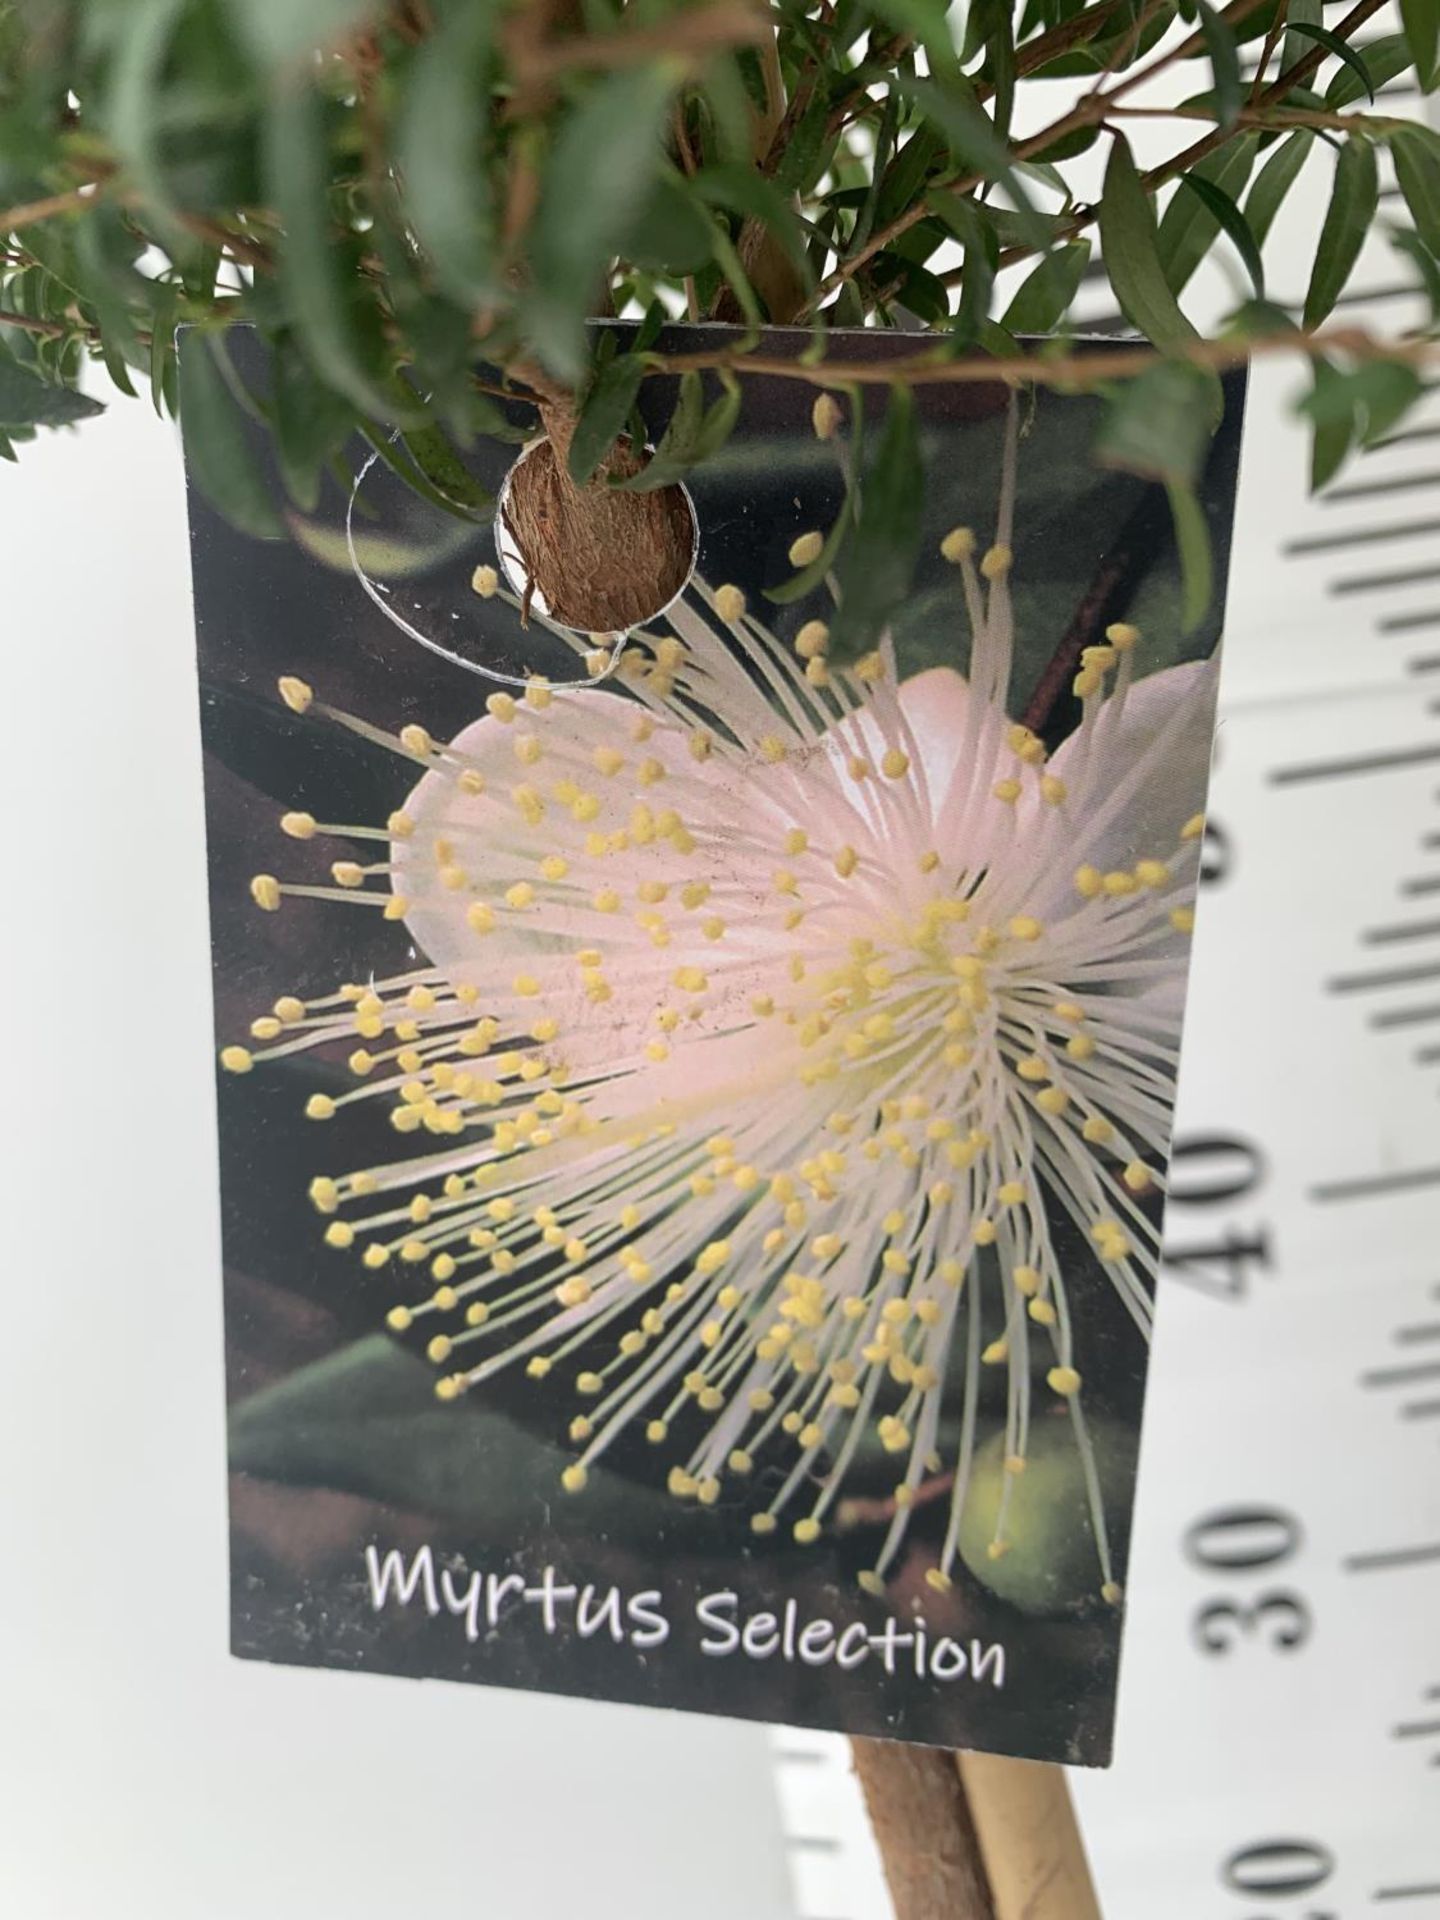 TWO MYRTUS SELECTION STANDARD TREES OF DIFFERING HEIGHTS ONE APPROX 85CM IN HEIGHT AND ONE 70CM IN 2 - Image 8 of 10